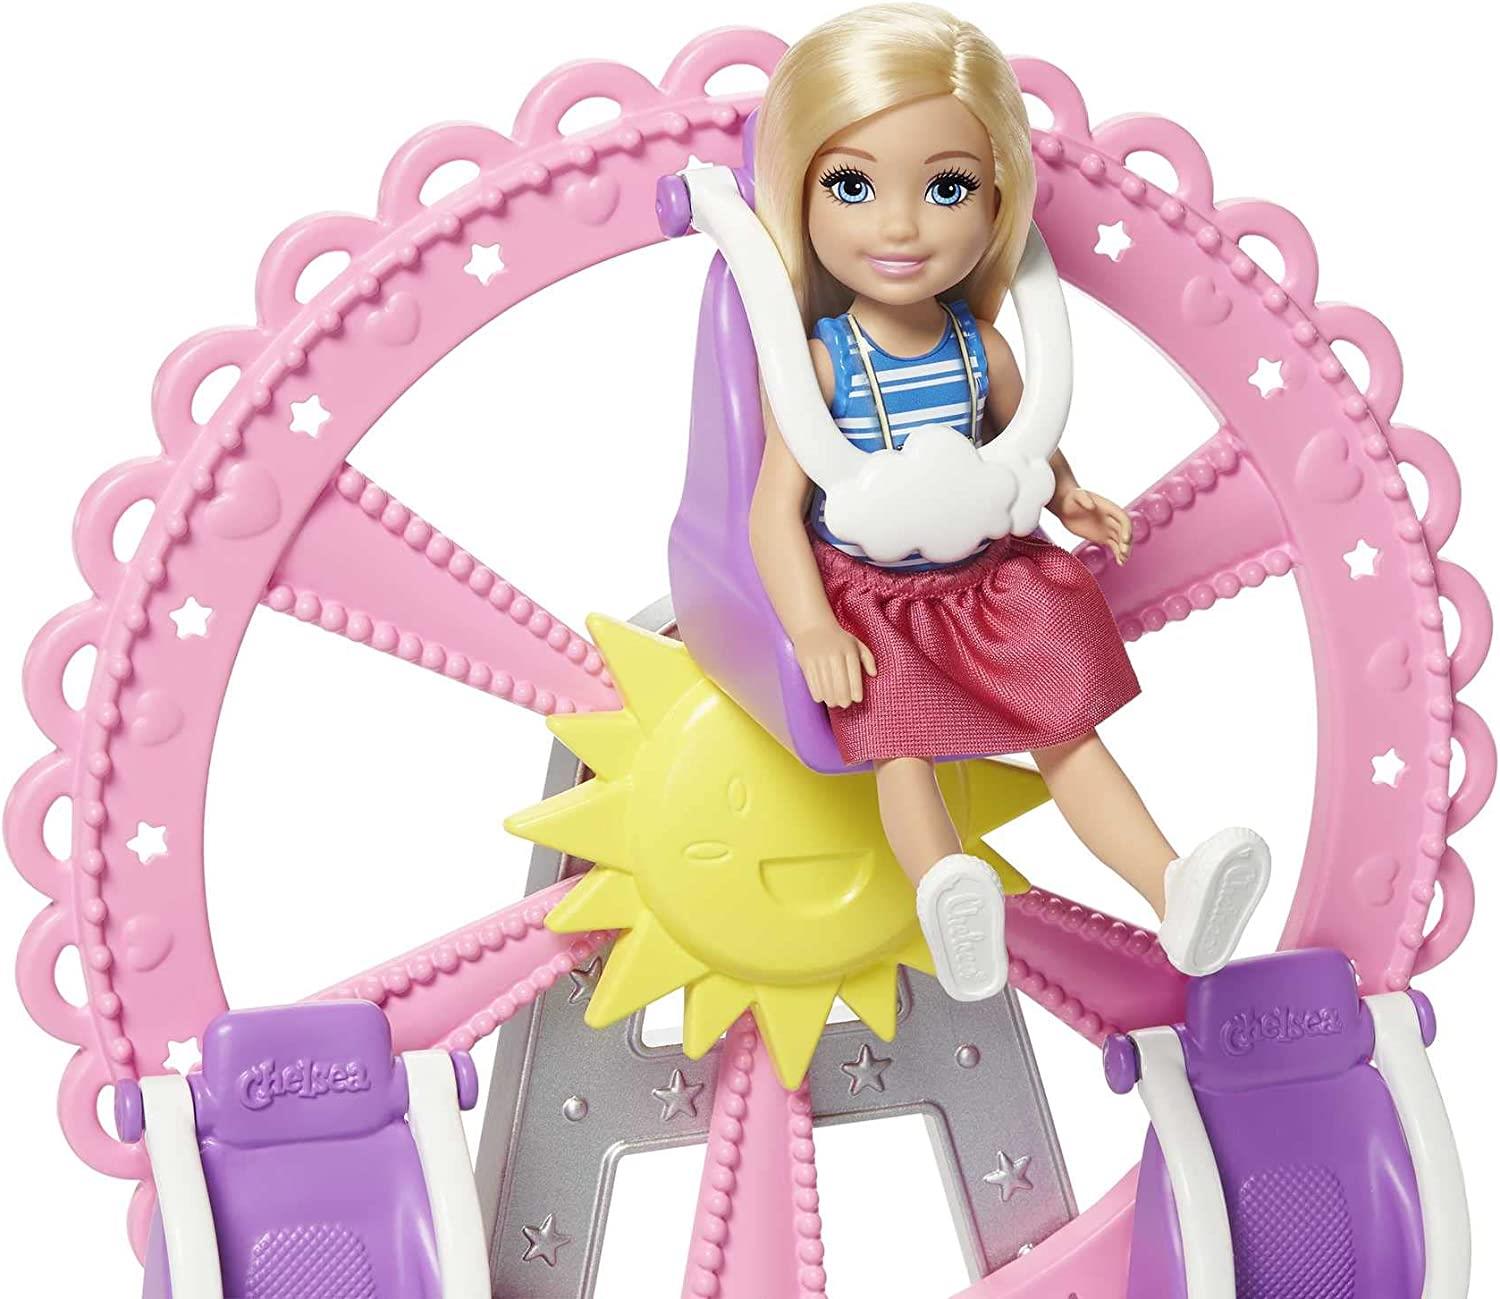 Barbie Club Chelsea Doll and Carnival Playset with 6-Inch Fashion Doll by Barbie - UKBuyZone